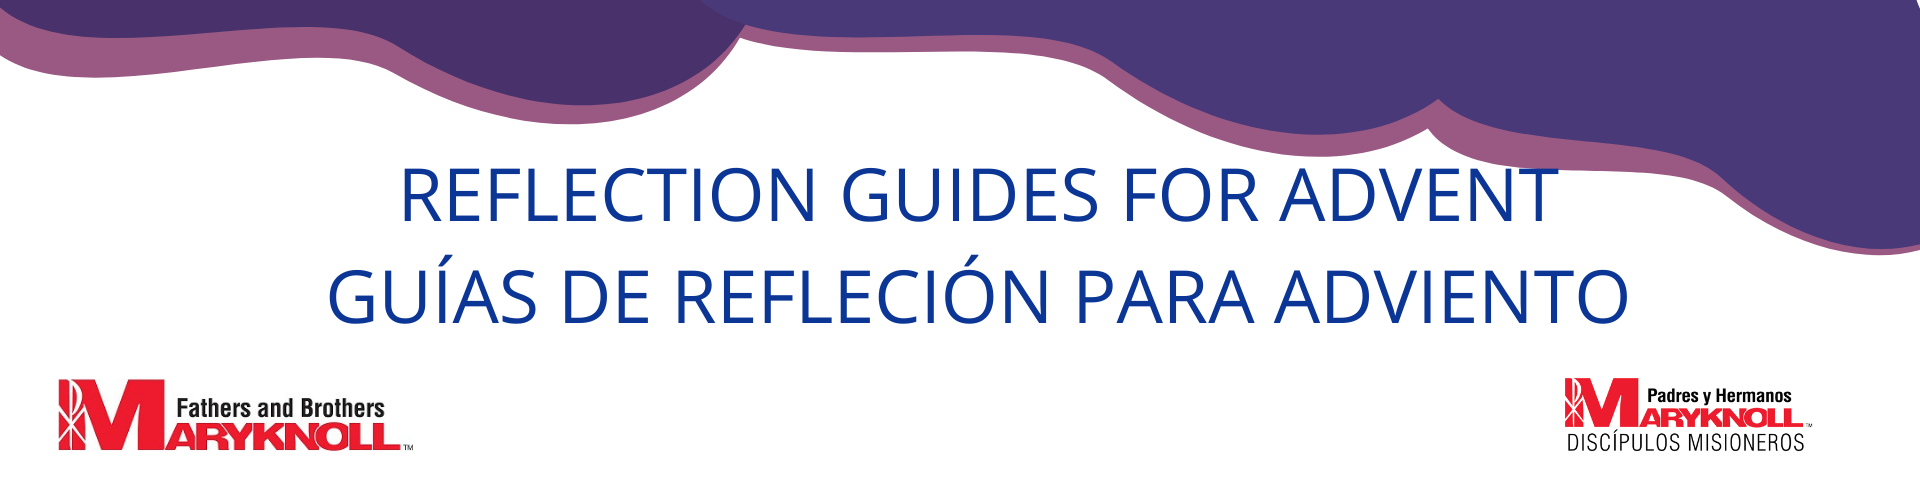 Advent Reflection Guides